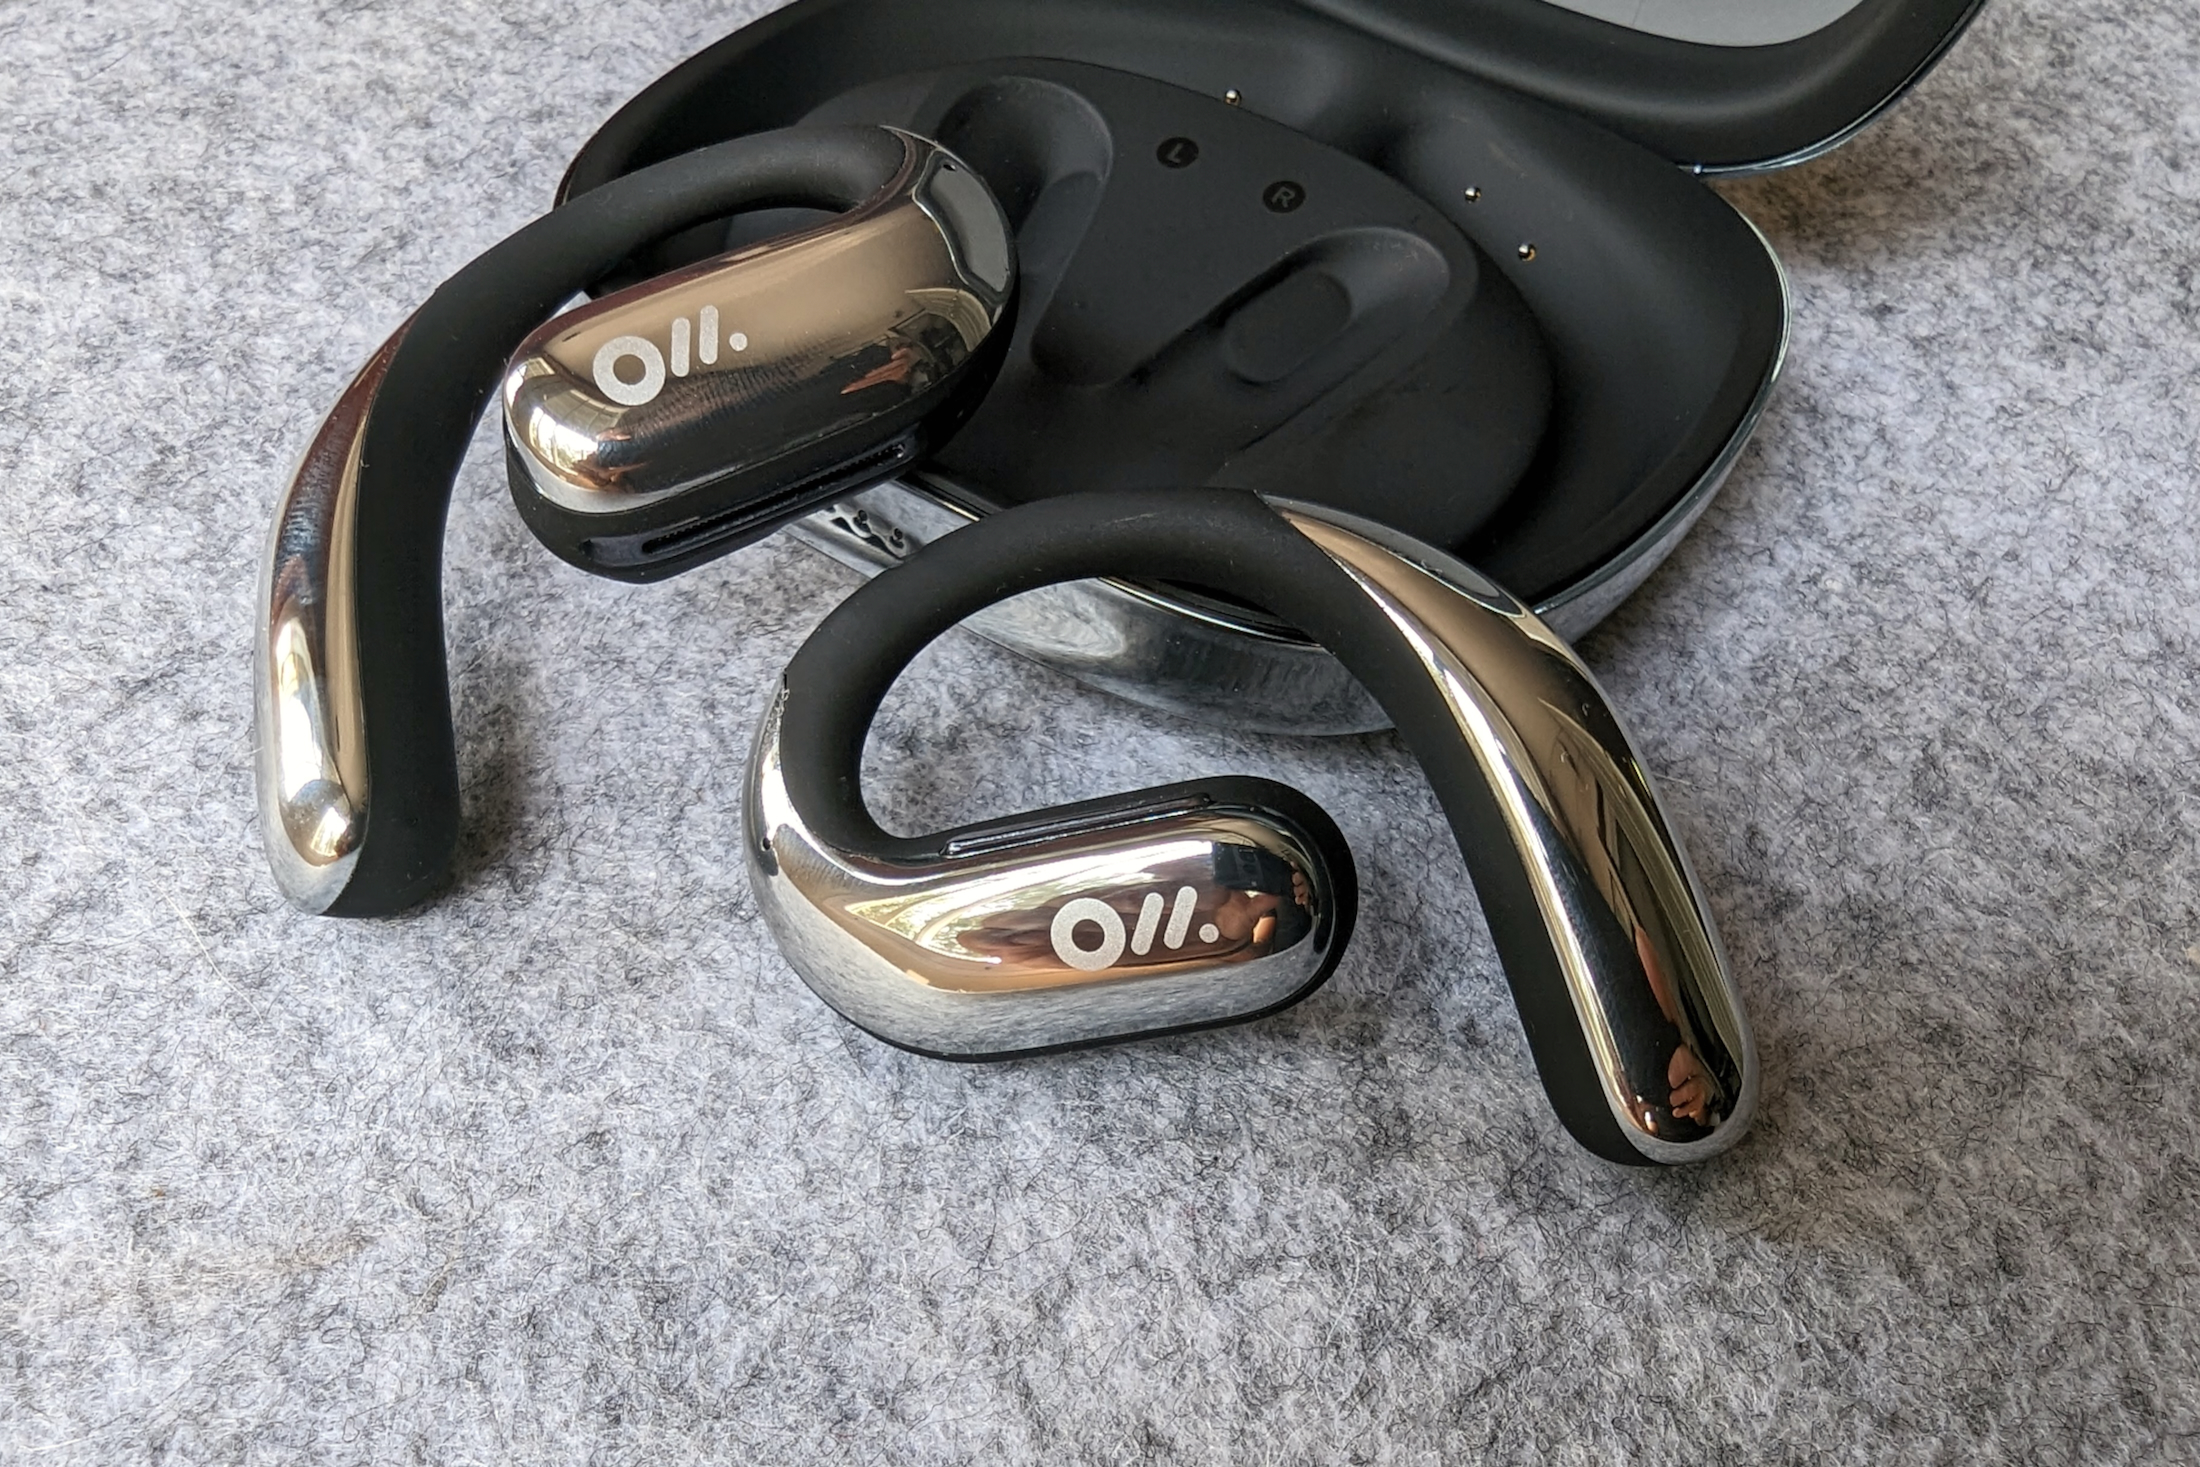 Oladance OWS Pro resting on open charging case.